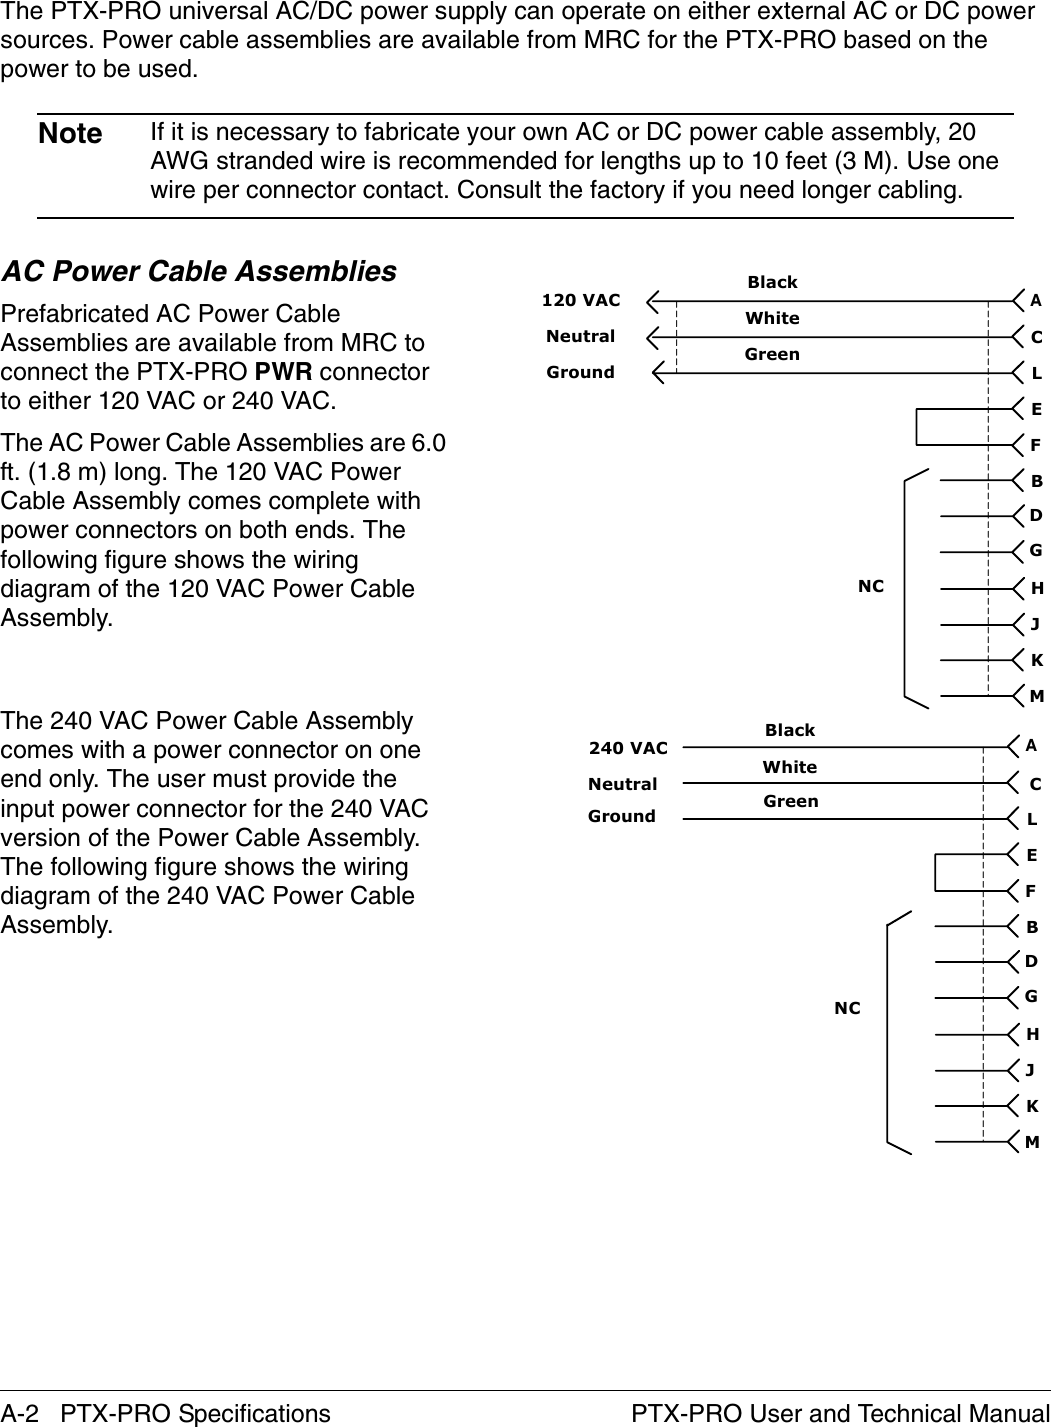 A-2   PTX-PRO Specifications PTX-PRO User and Technical ManualThe PTX-PRO universal AC/DC power supply can operate on either external AC or DC power sources. Power cable assemblies are available from MRC for the PTX-PRO based on the power to be used. Note If it is necessary to fabricate your own AC or DC power cable assembly, 20 AWG stranded wire is recommended for lengths up to 10 feet (3 M). Use one wire per connector contact. Consult the factory if you need longer cabling.AC Power Cable AssembliesPrefabricated AC Power Cable Assemblies are available from MRC to connect the PTX-PRO PWR connector to either 120 VAC or 240 VAC. The AC Power Cable Assemblies are 6.0 ft. (1.8 m) long. The 120 VAC Power Cable Assembly comes complete with power connectors on both ends. The following figure shows the wiring diagram of the 120 VAC Power Cable Assembly. The 240 VAC Power Cable Assembly comes with a power connector on one end only. The user must provide the input power connector for the 240 VAC version of the Power Cable Assembly. The following figure shows the wiring diagram of the 240 VAC Power Cable Assembly.WhiteBlackGreenCALEFBDGHJKMNC120 VACNeutralGroundWhiteBlackGreenCALEFBDGHJKMNCNeutral240 VACGround